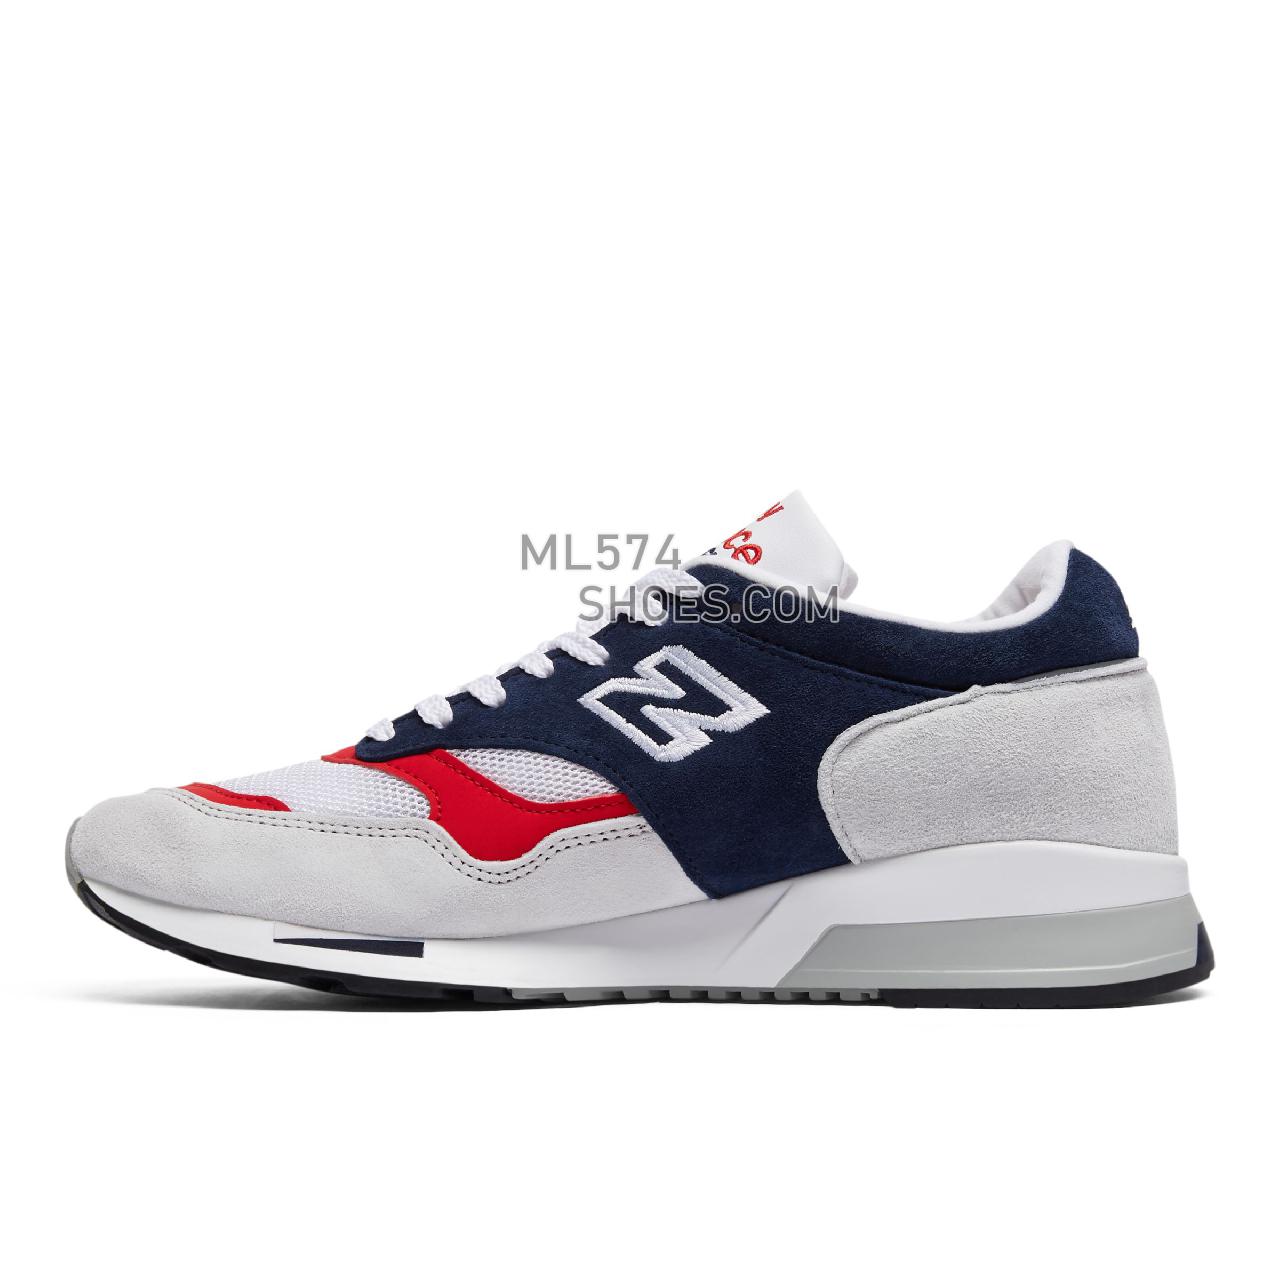 New Balance Made in UK 1500 - Men's Made in USA And UK Sneakers - Grey with blue and red - M1500GWR